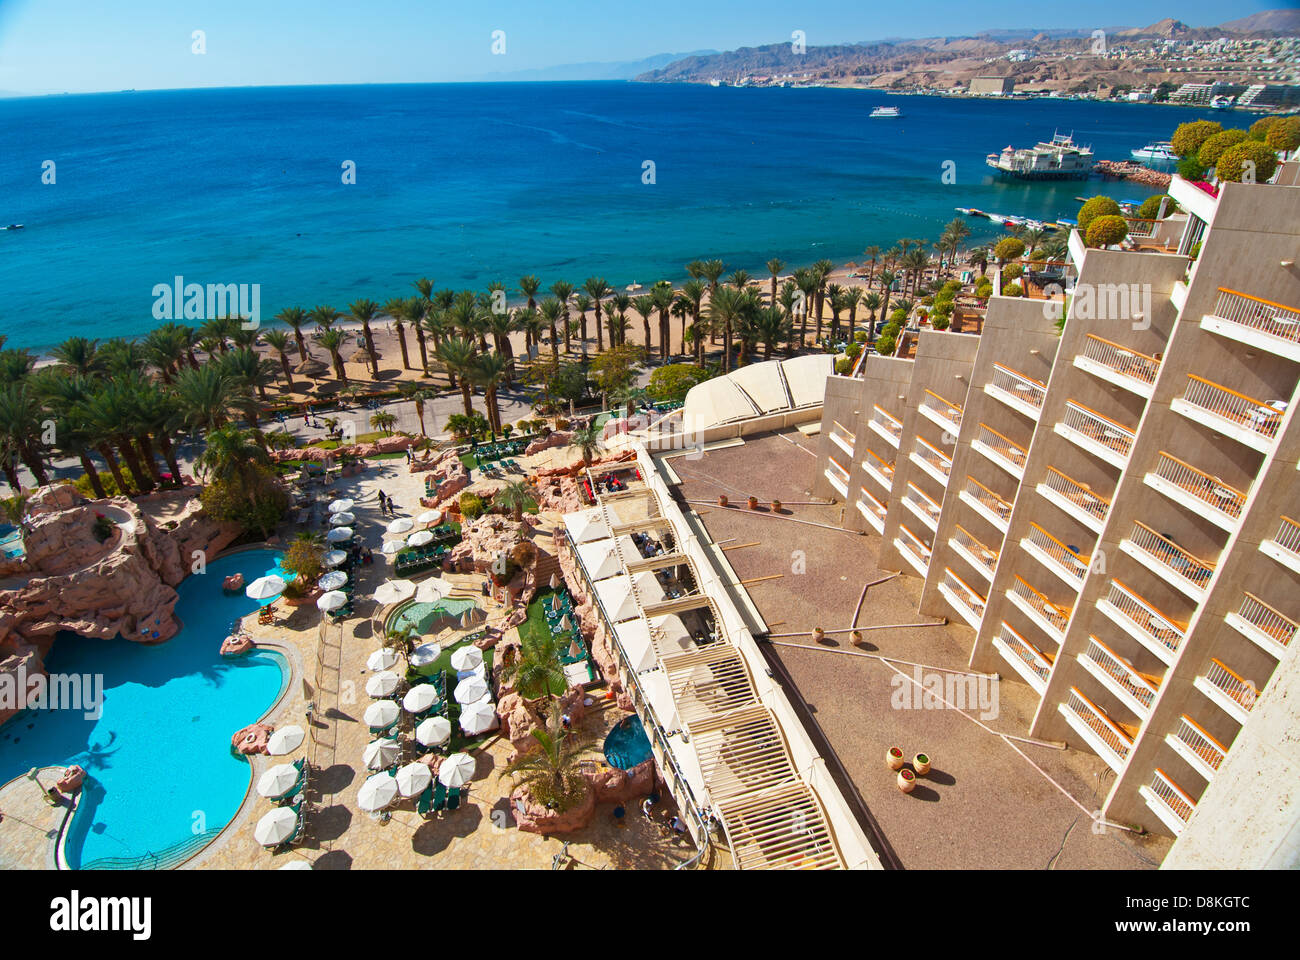 View from room at the Dan Eilat Hotel, Eilat, Israel Stock Photo